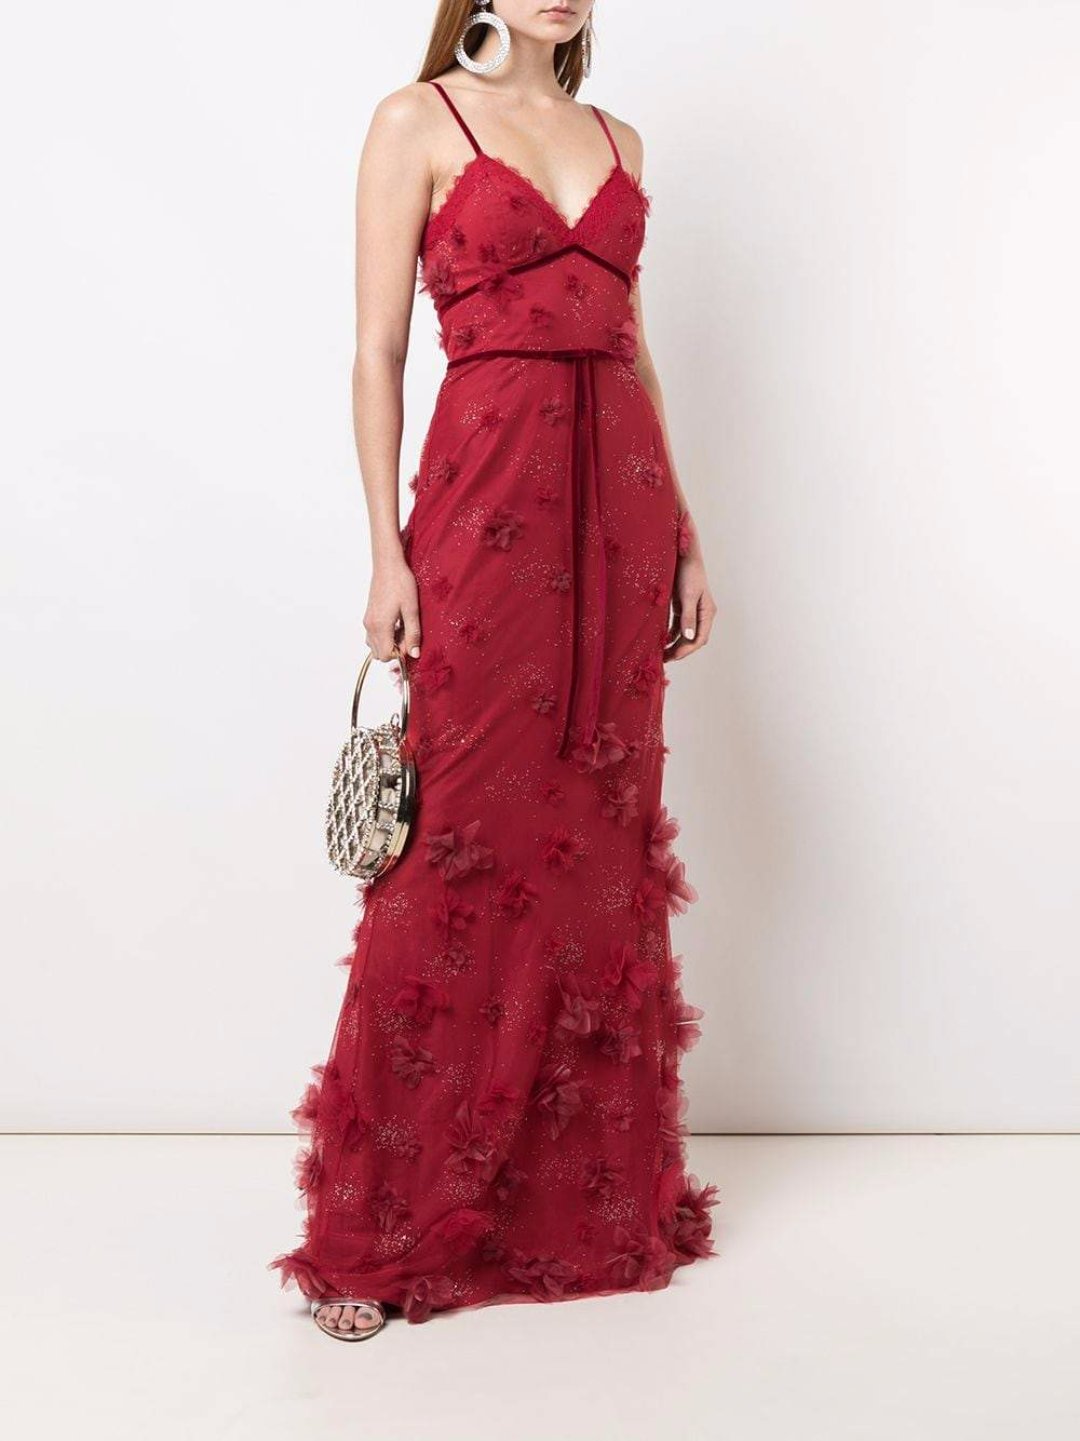 3D Floral Fit-to-Flare Gown – Marchesa